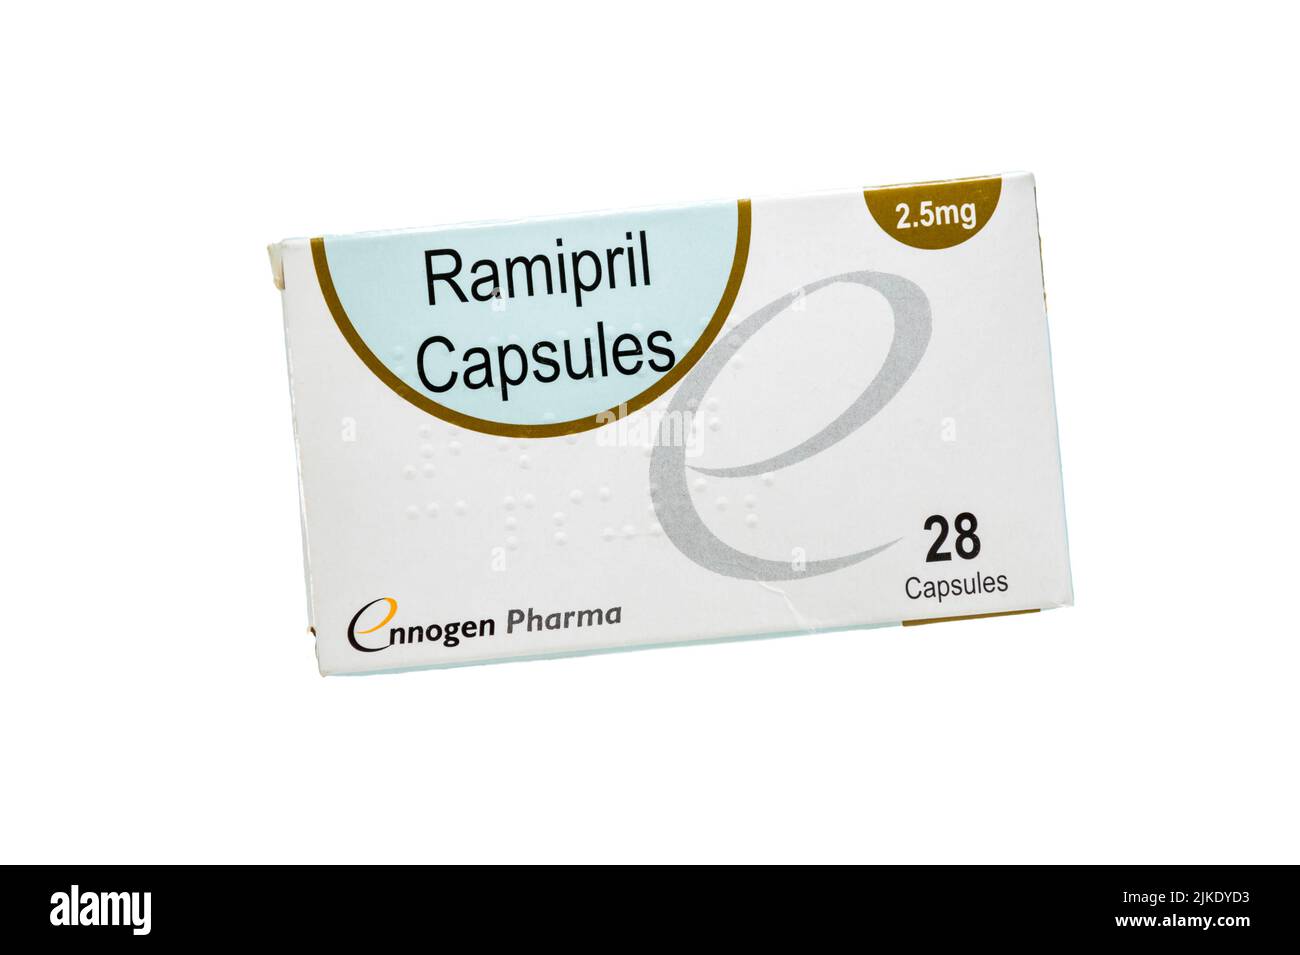 Stock image of a pack of Ramipril Capsules, an ACE Inhibitor used in the treatment of high blood pressure. Stock Photo